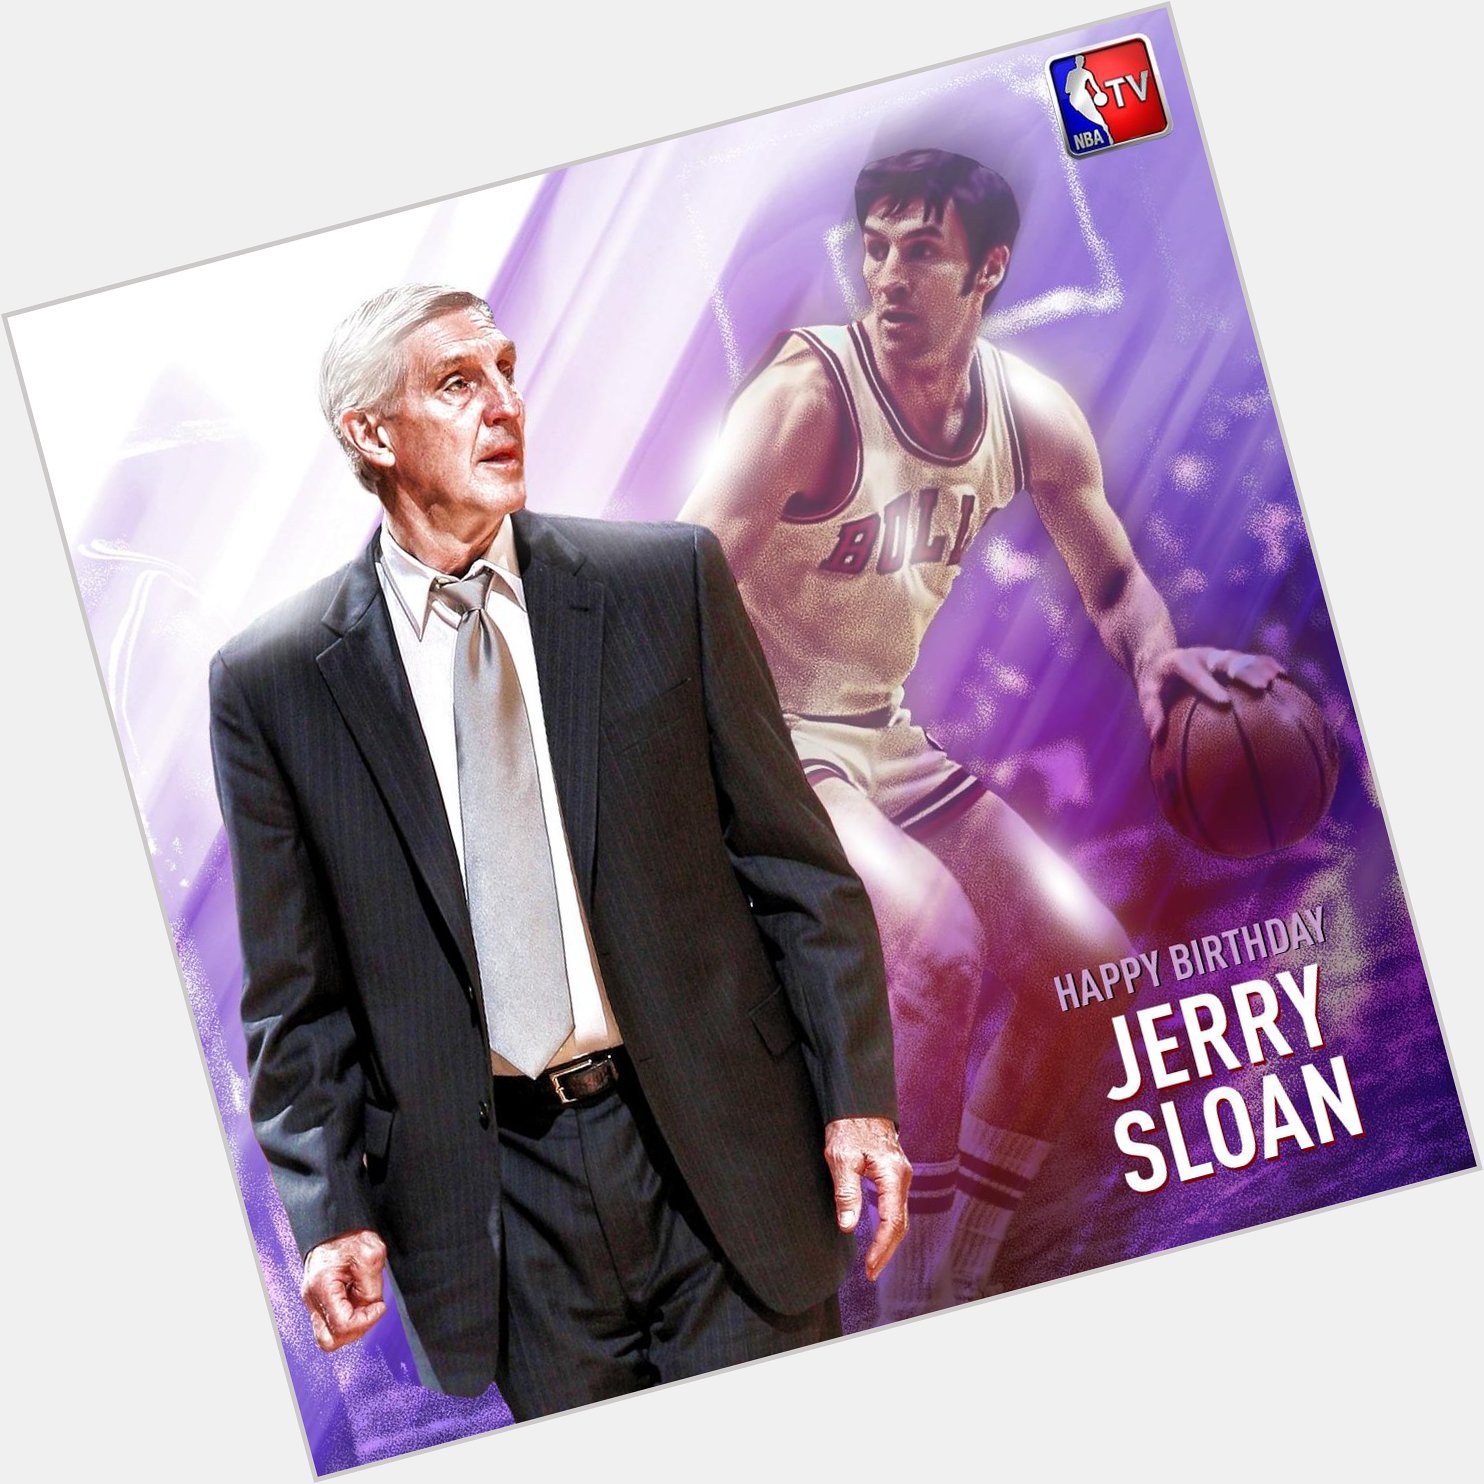 Happy Birthday to Jerry Sloan! The former Jazz coach is 3rd all-time in wins. 